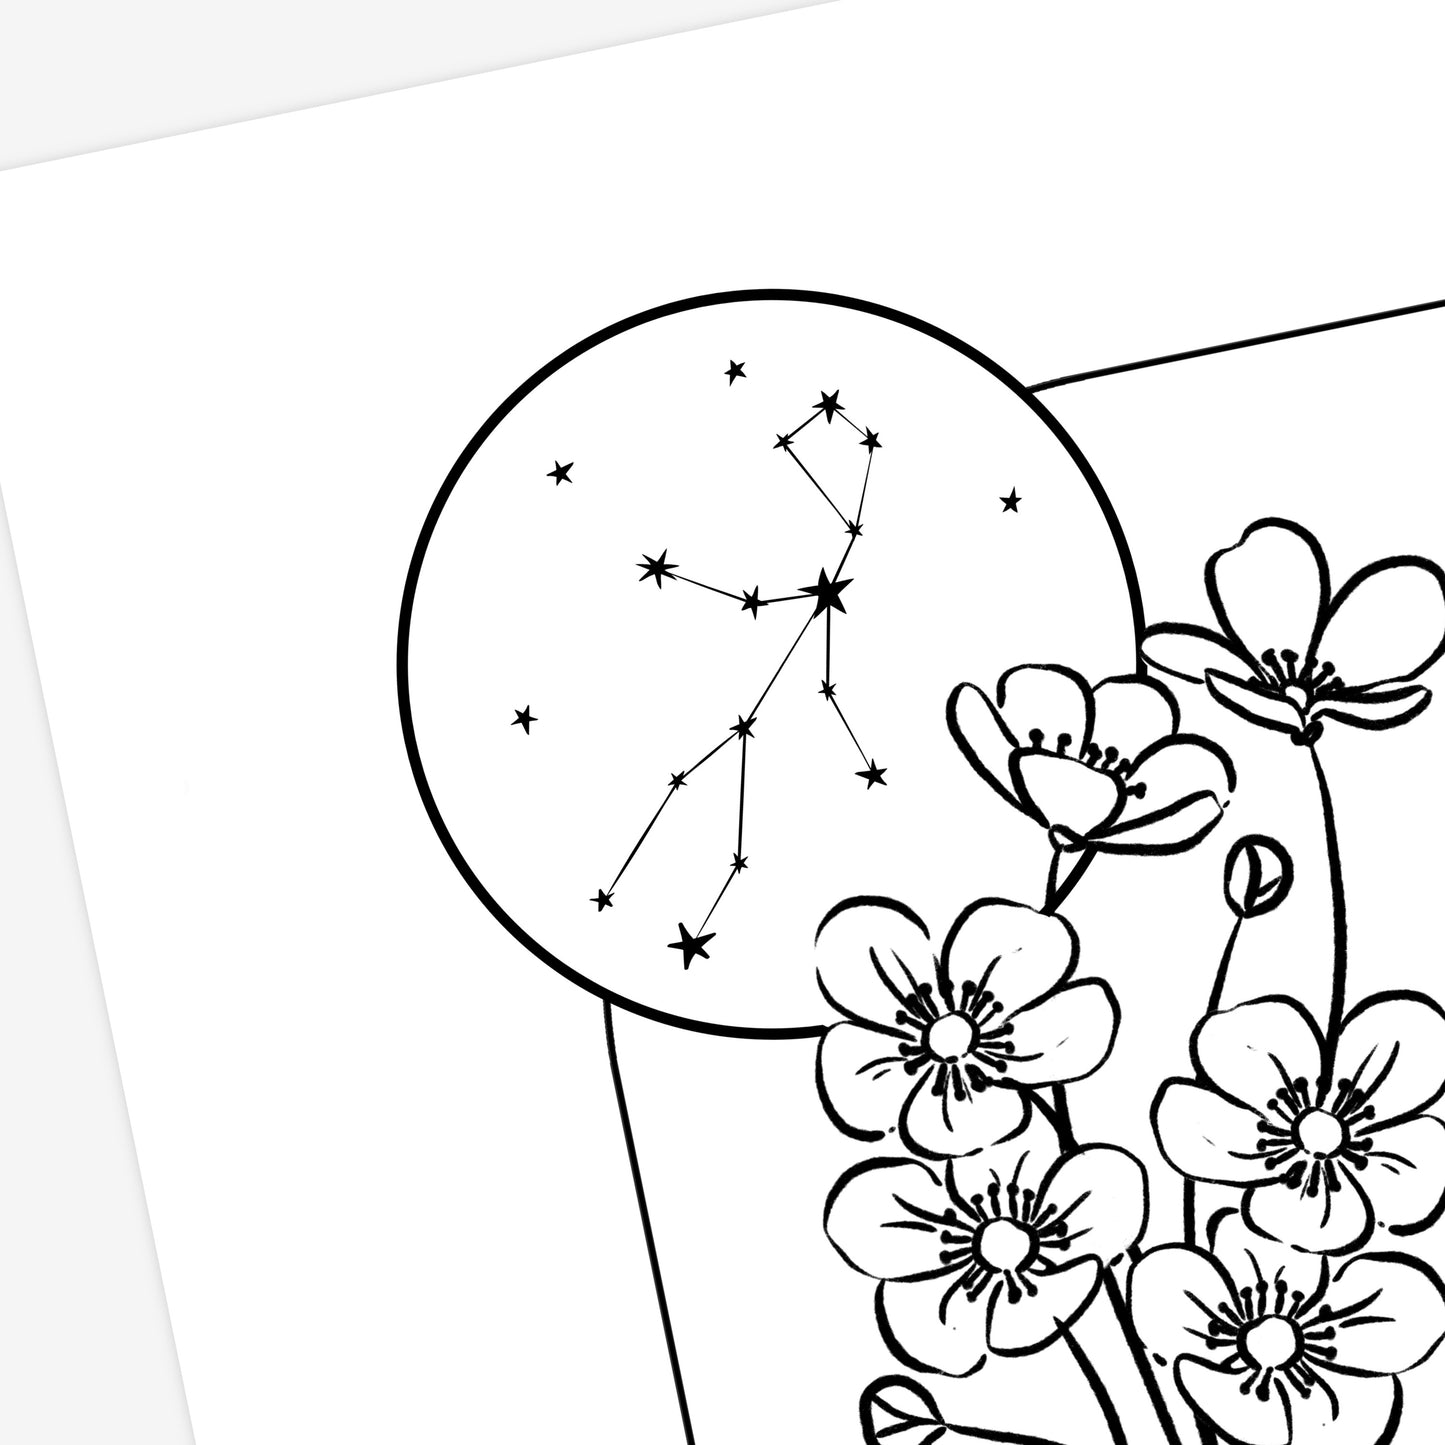 12 Zodiac Birth Flower Coloring Page Printables | Astrology Coloring Book | Floral Inspired Digital Sheets